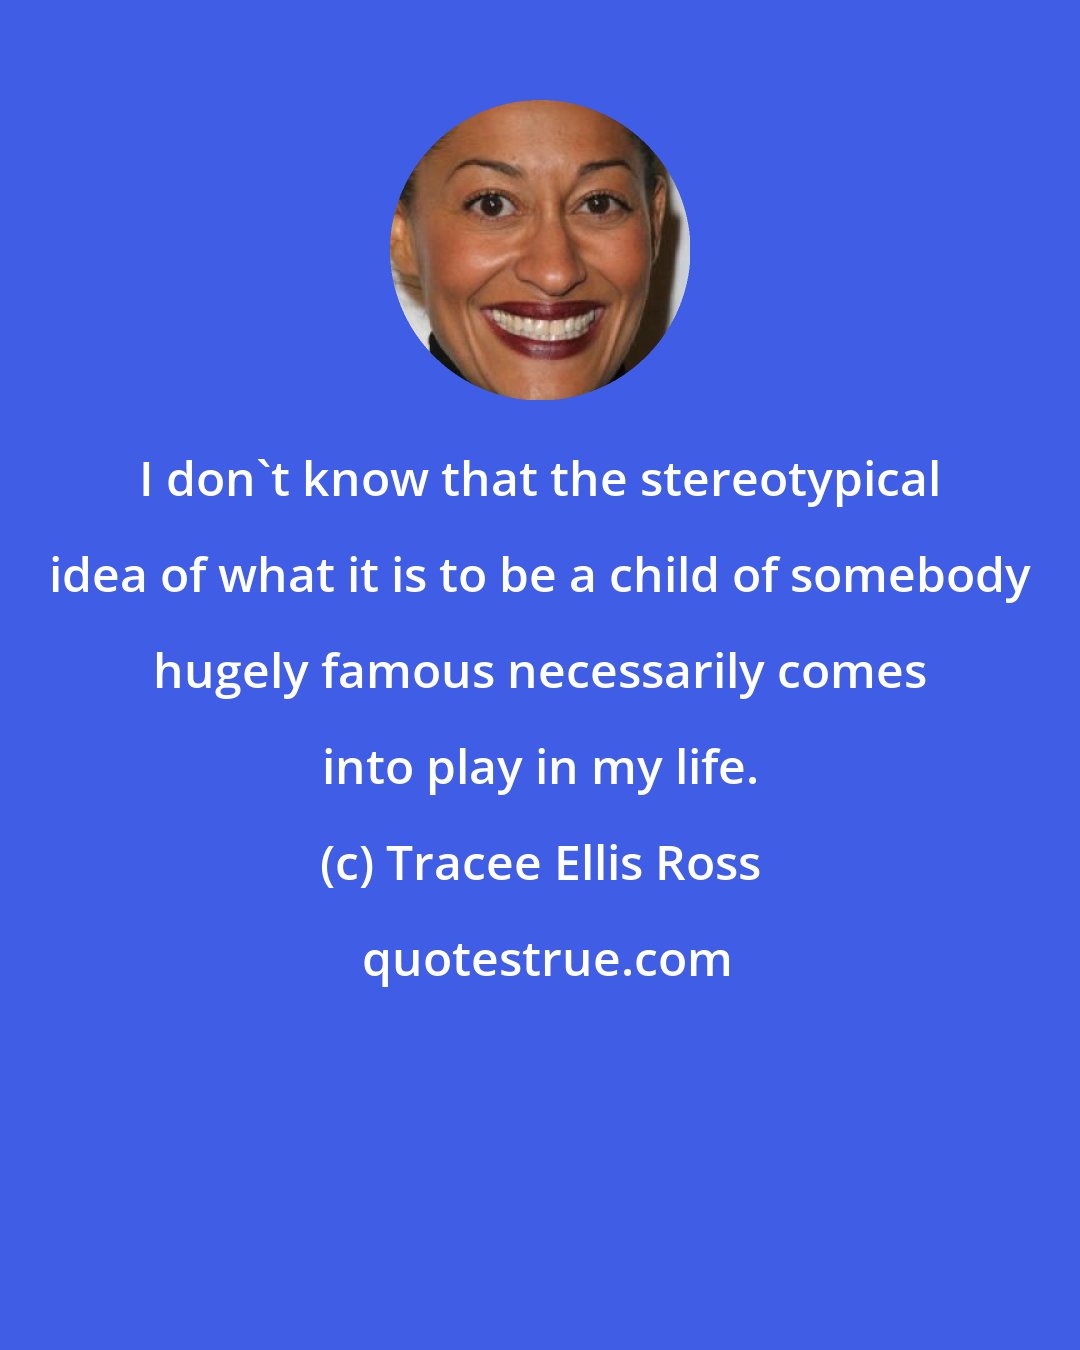 Tracee Ellis Ross: I don't know that the stereotypical idea of what it is to be a child of somebody hugely famous necessarily comes into play in my life.